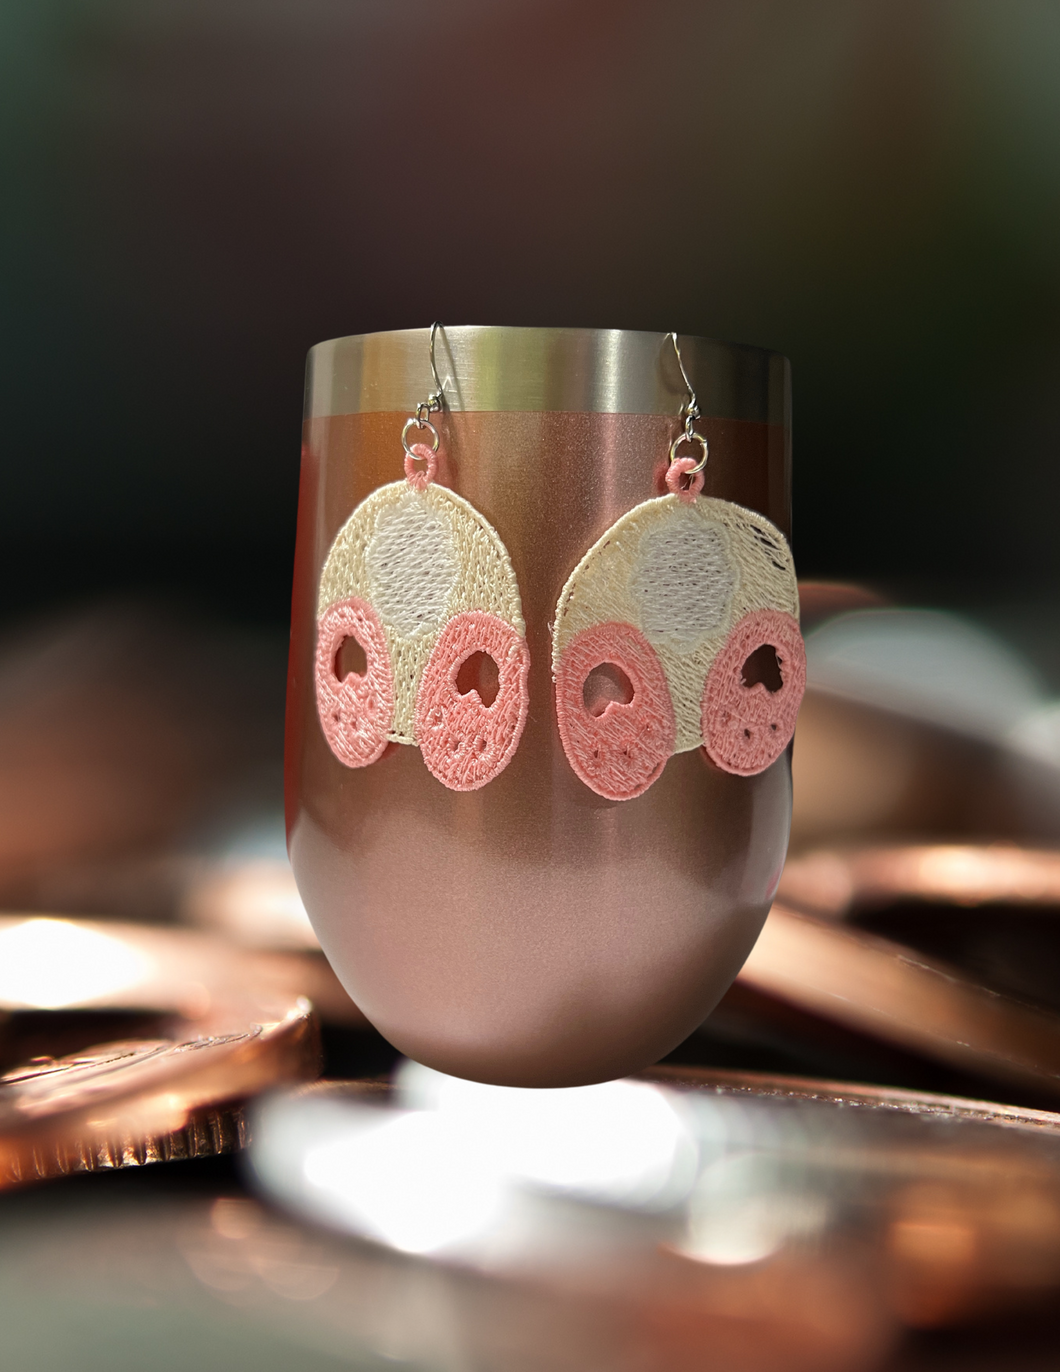 Earrings - Embroidered Bunny Butt